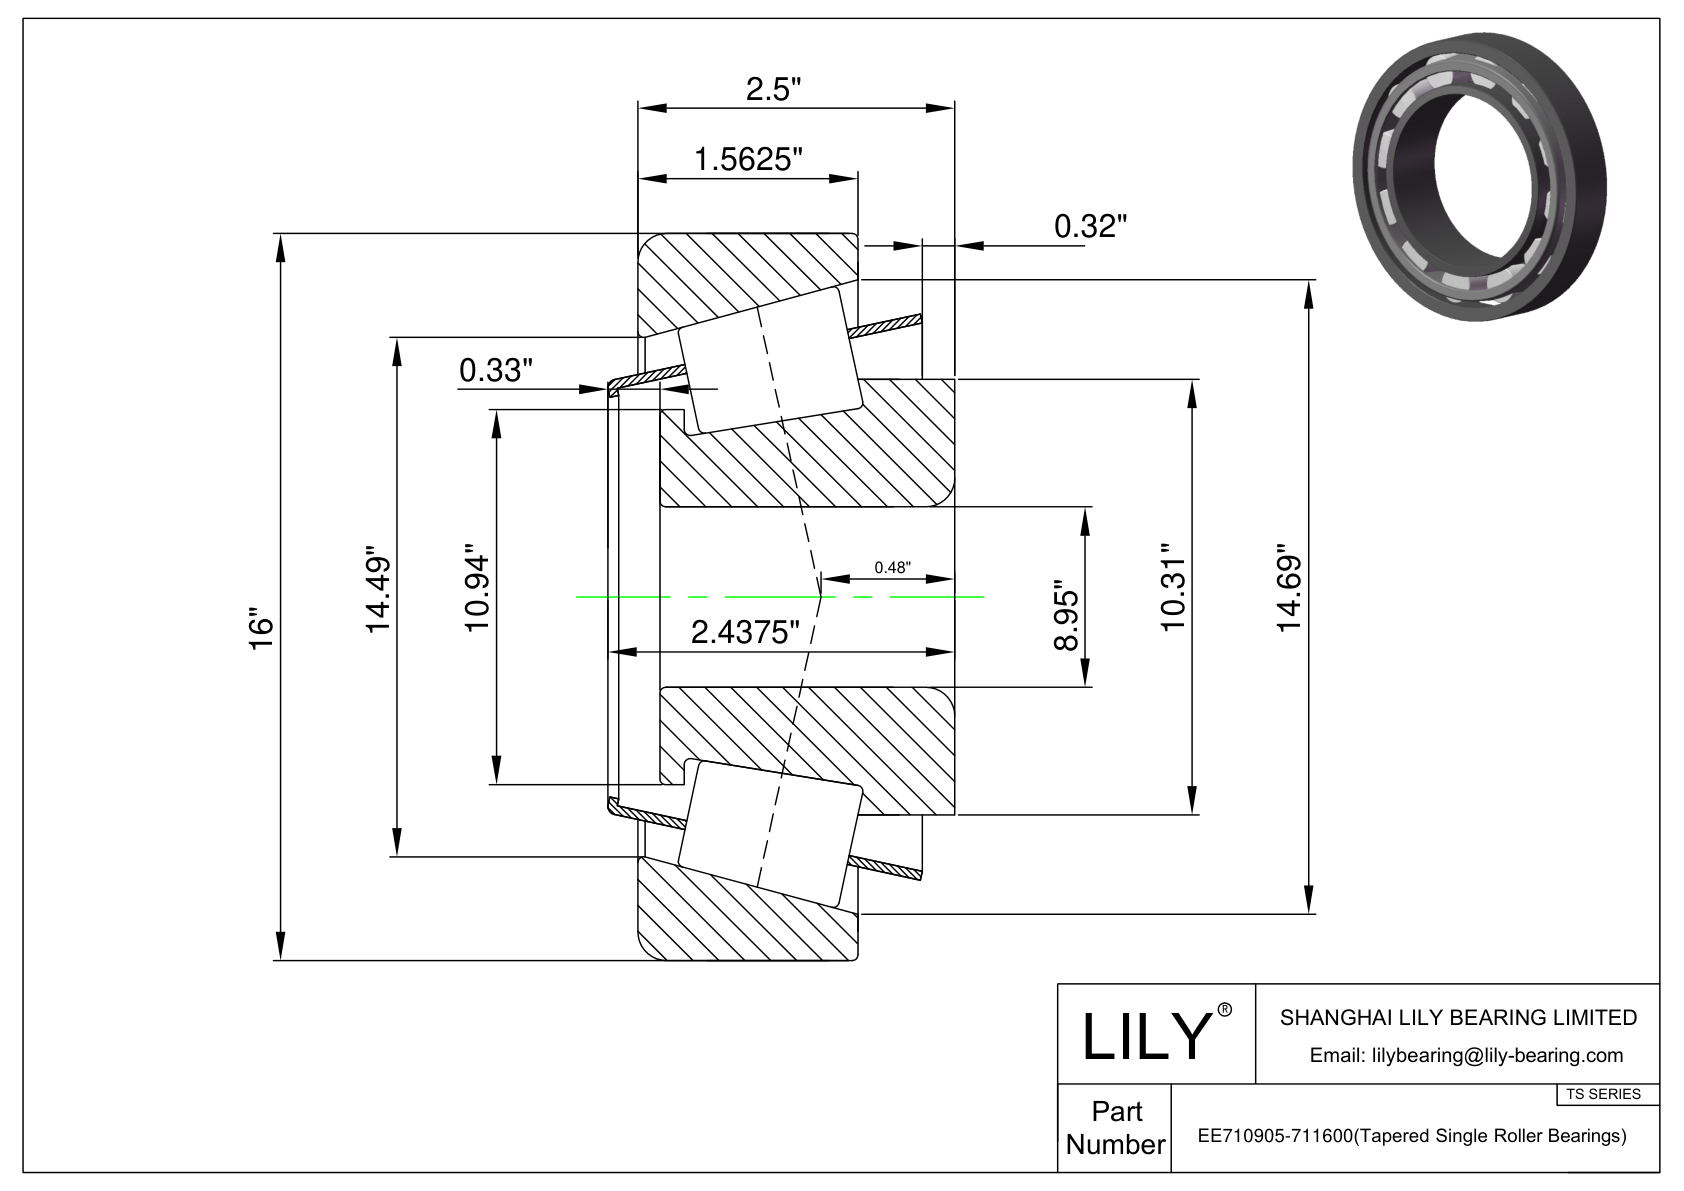 EE710905-711600 TS (Tapered Single Roller Bearings) (Imperial) cad drawing